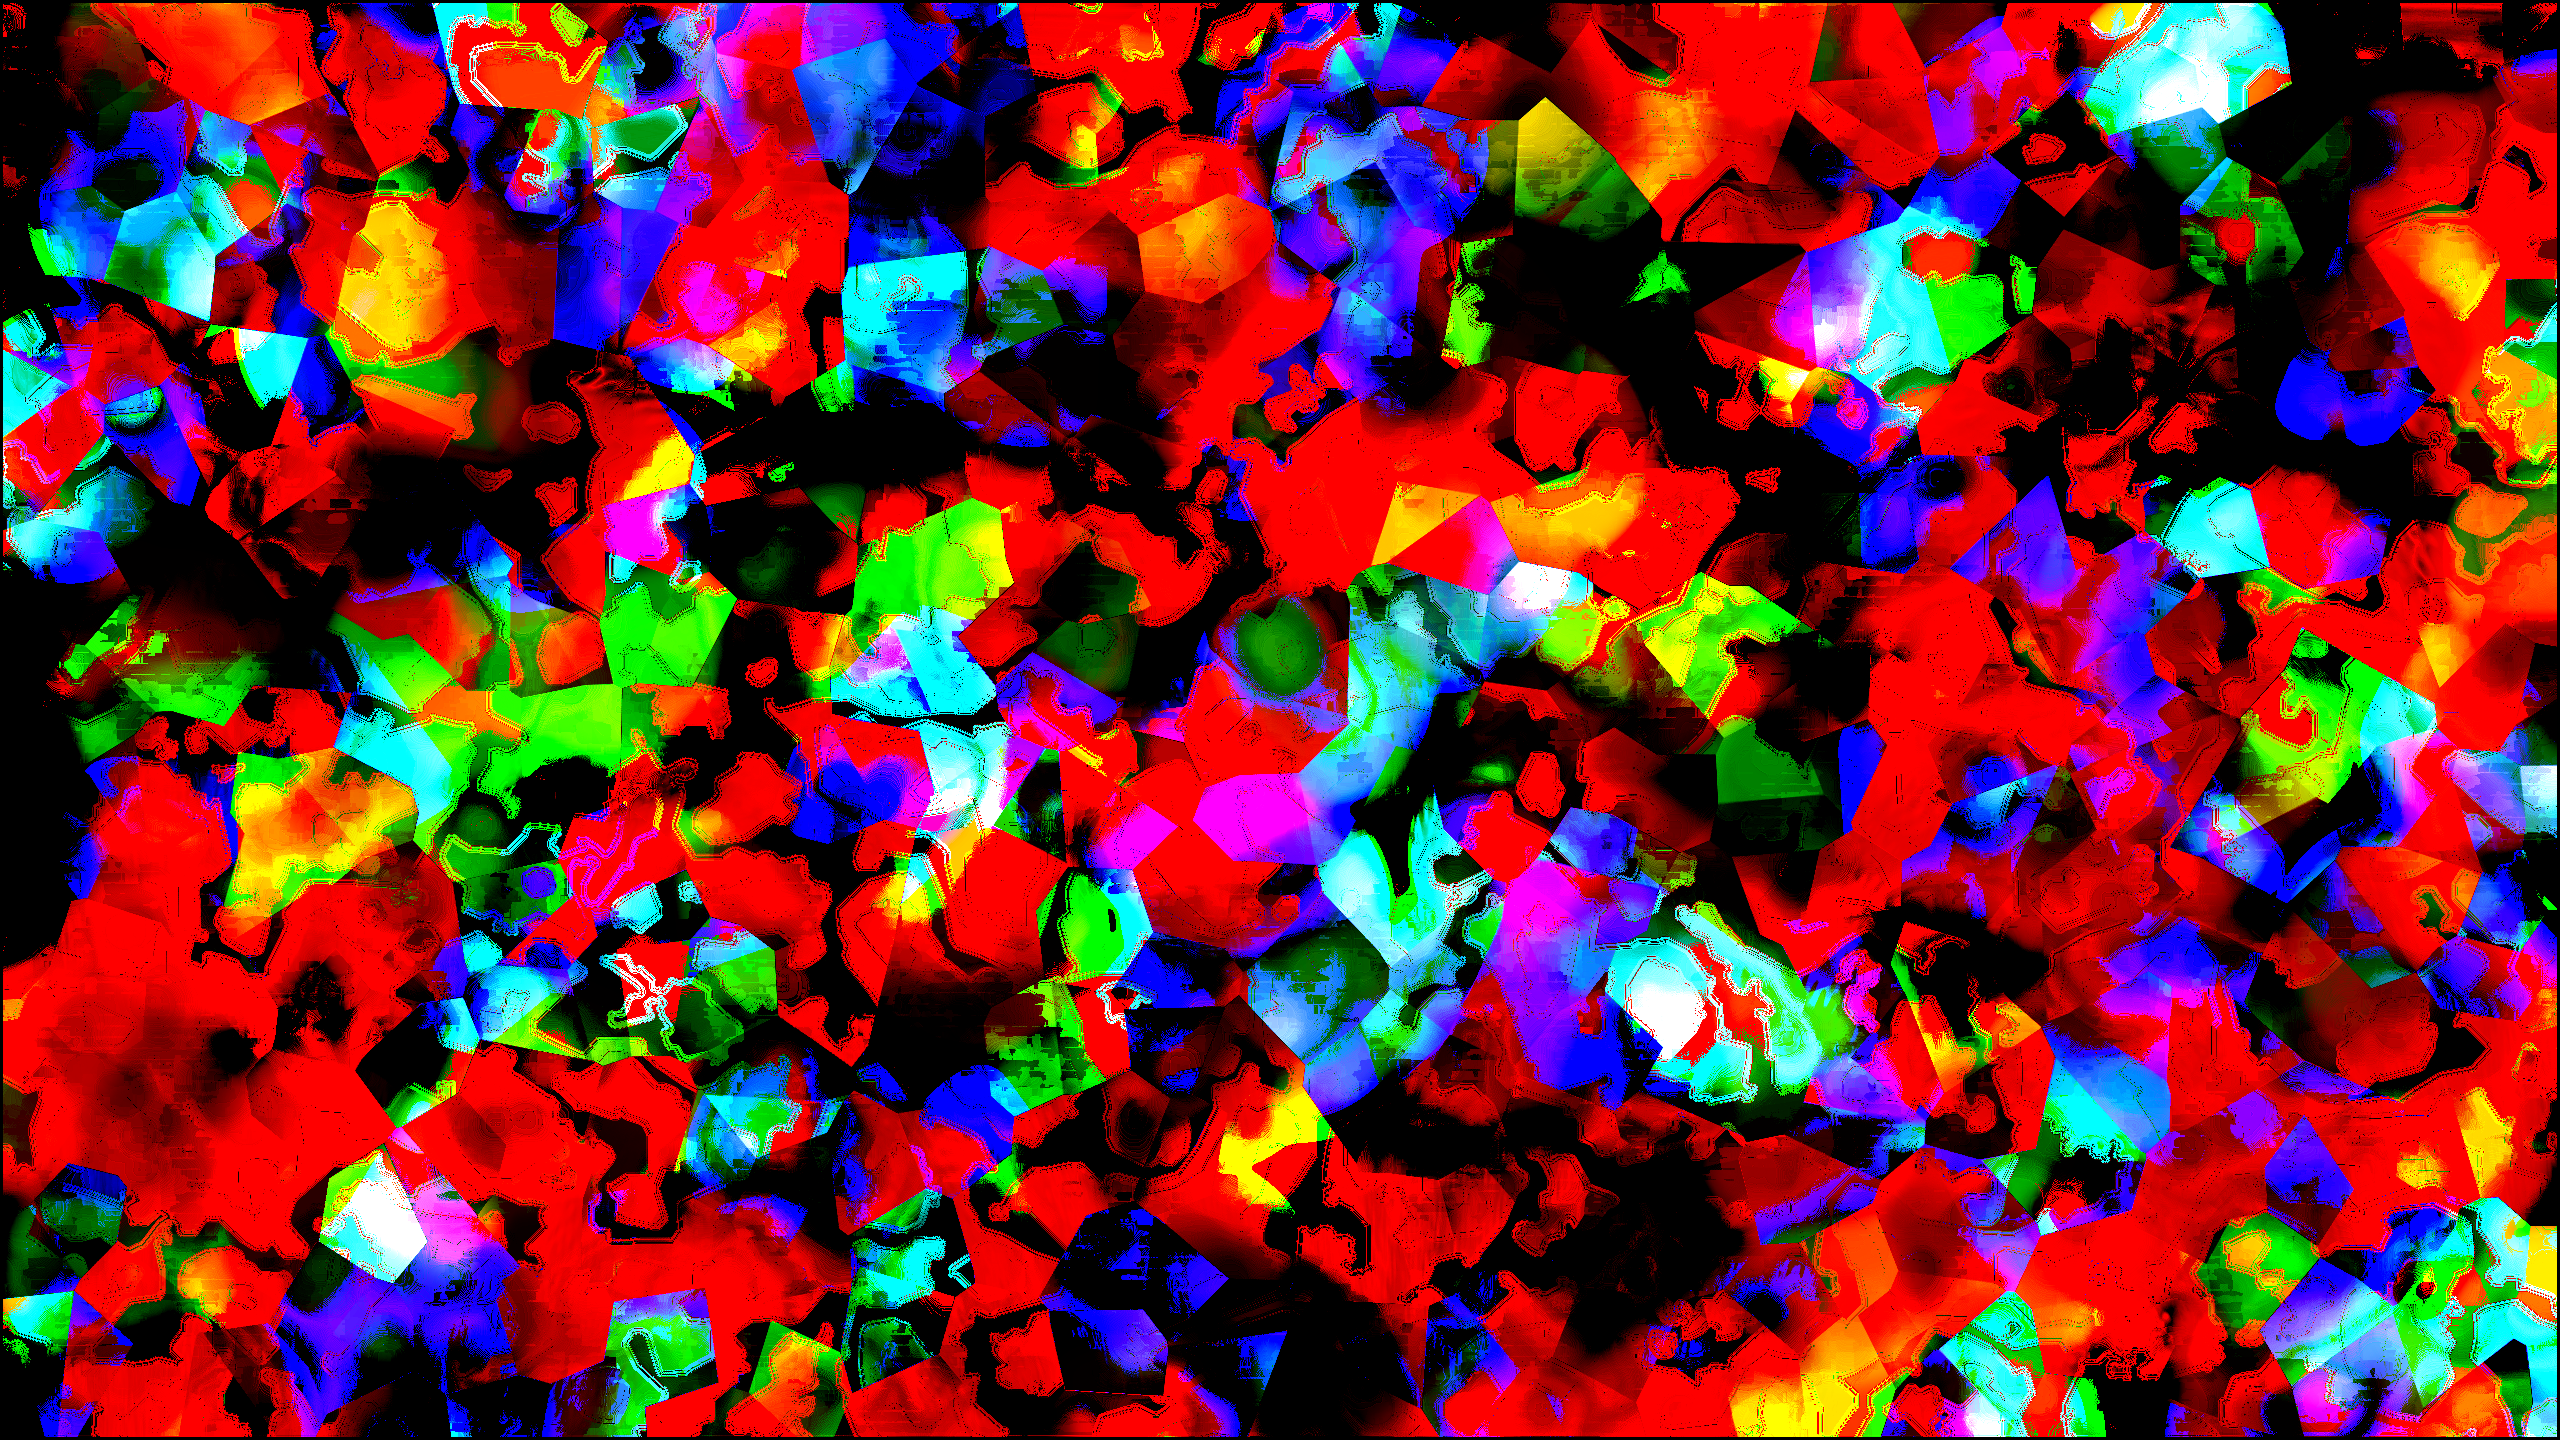 General 2560x1440 bright abstract trippy LSD crystal  digital art colorful texture